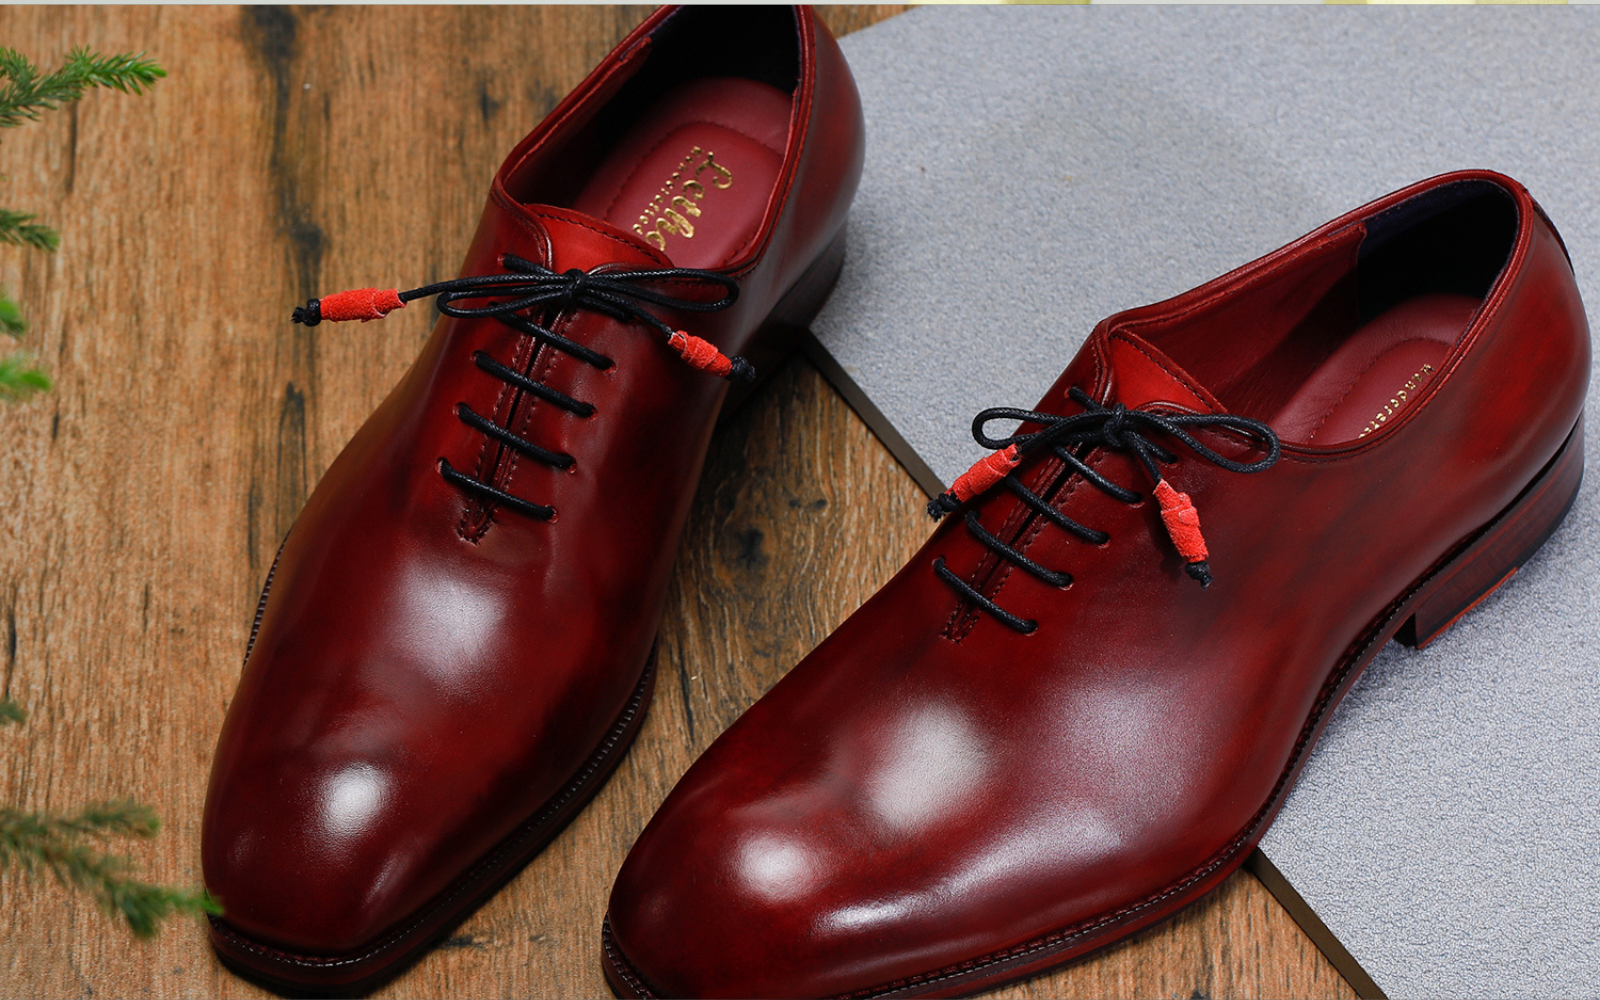 Top 5 Reasons to Buy Wholecut Oxford Leather Shoes